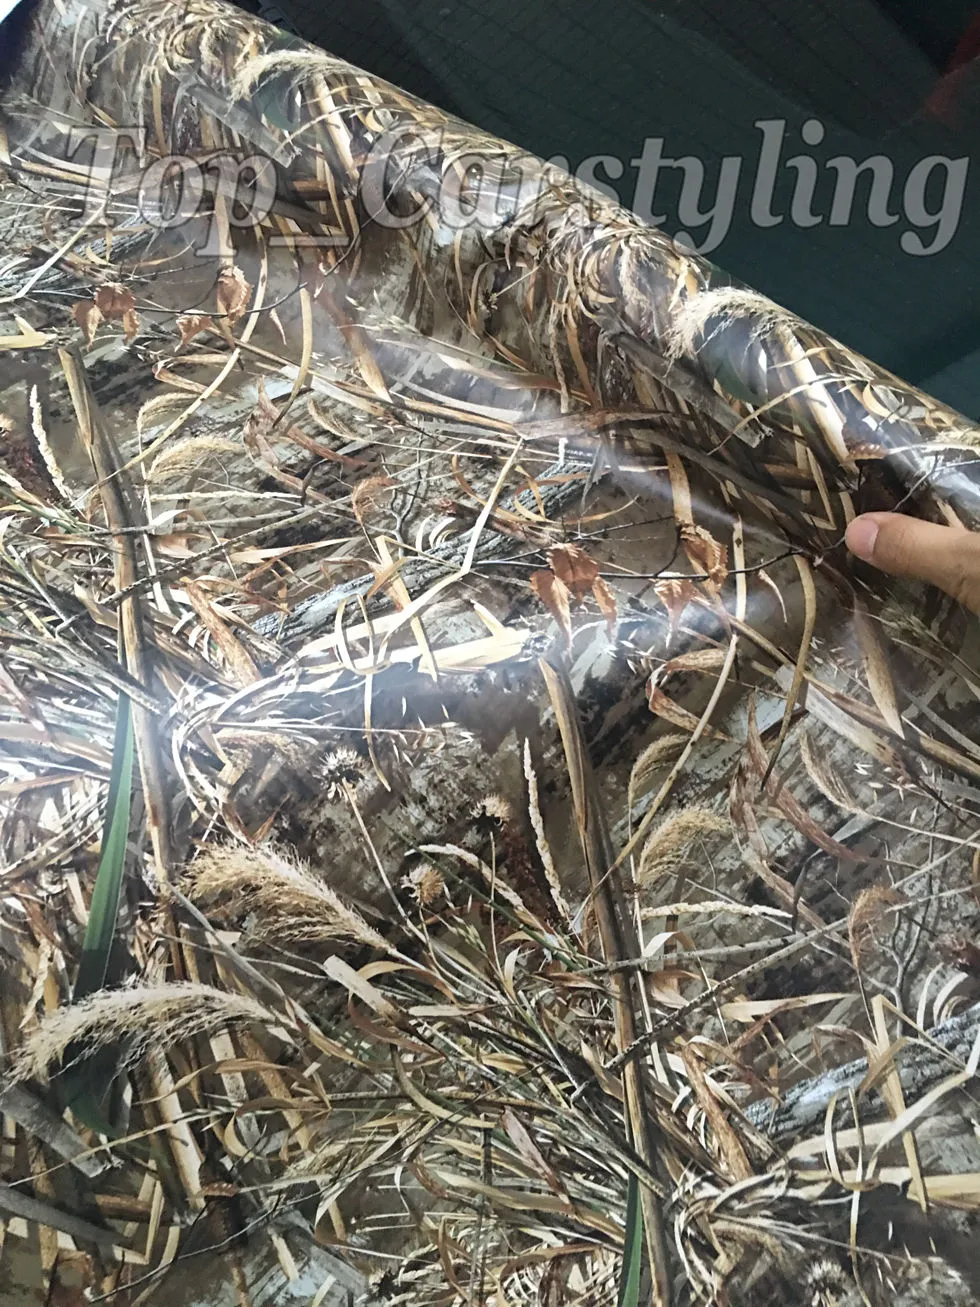 Realtree Camo Vinyl Wrap Grass Leaf Camouflage Mossy Oak Car Wrap Film Foil For Vehicle Skin Styling Covering Stickers